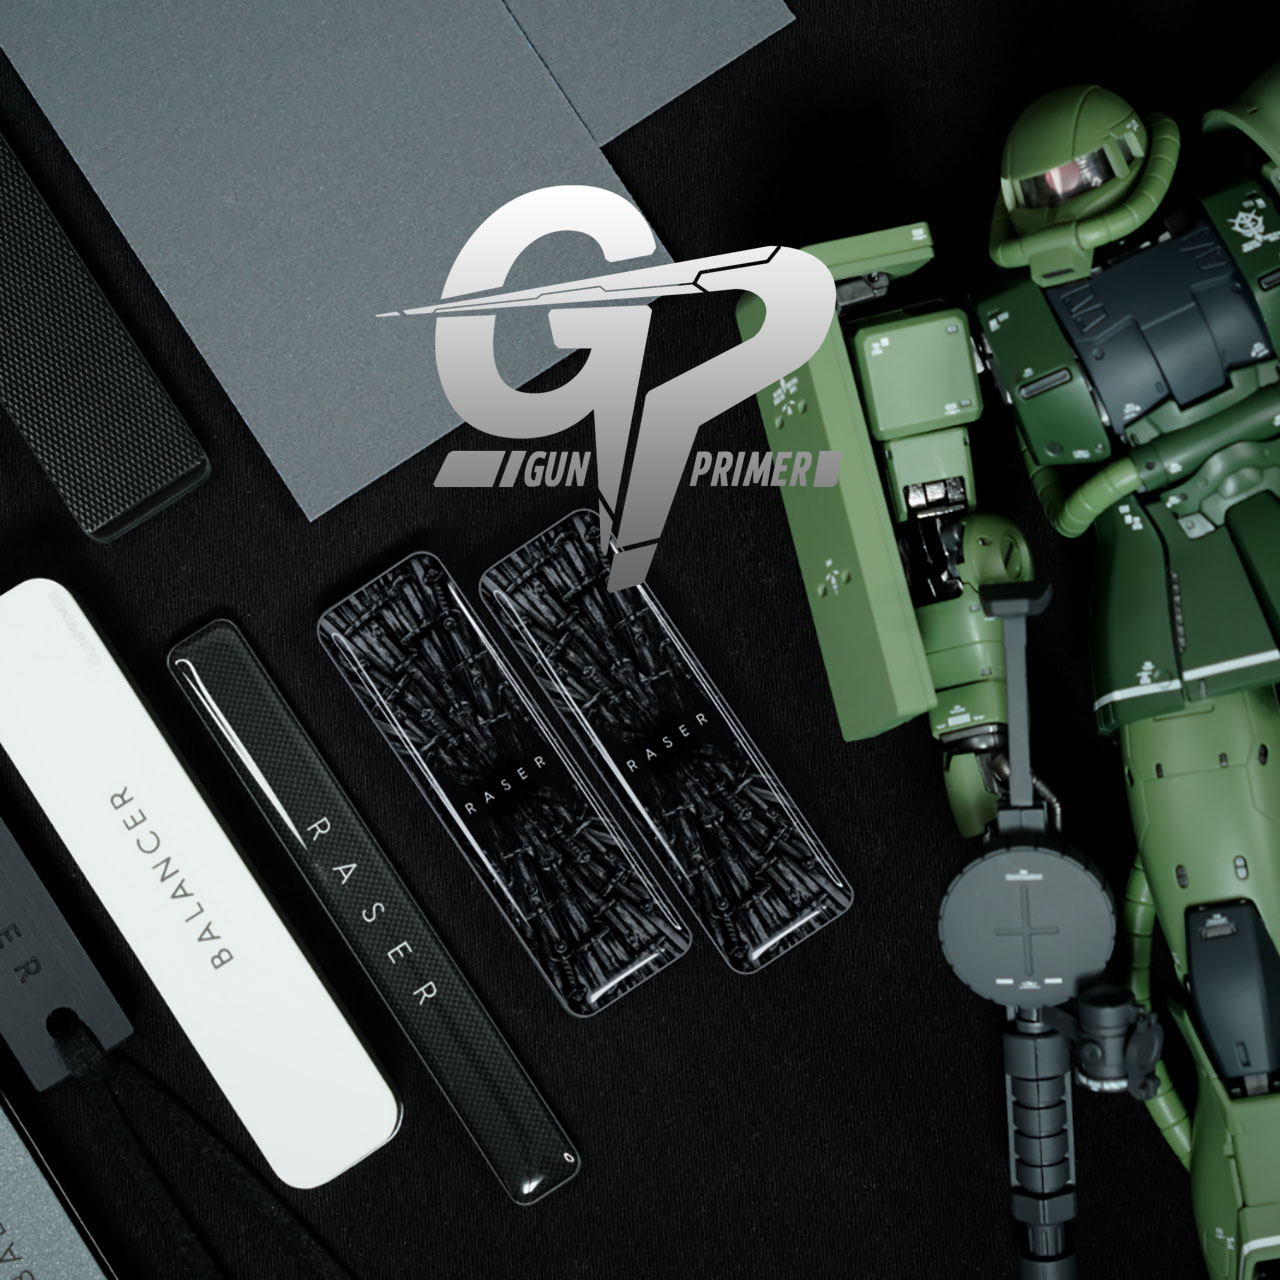 Gundam Planet - GunPrimer tools and accessories are available now!